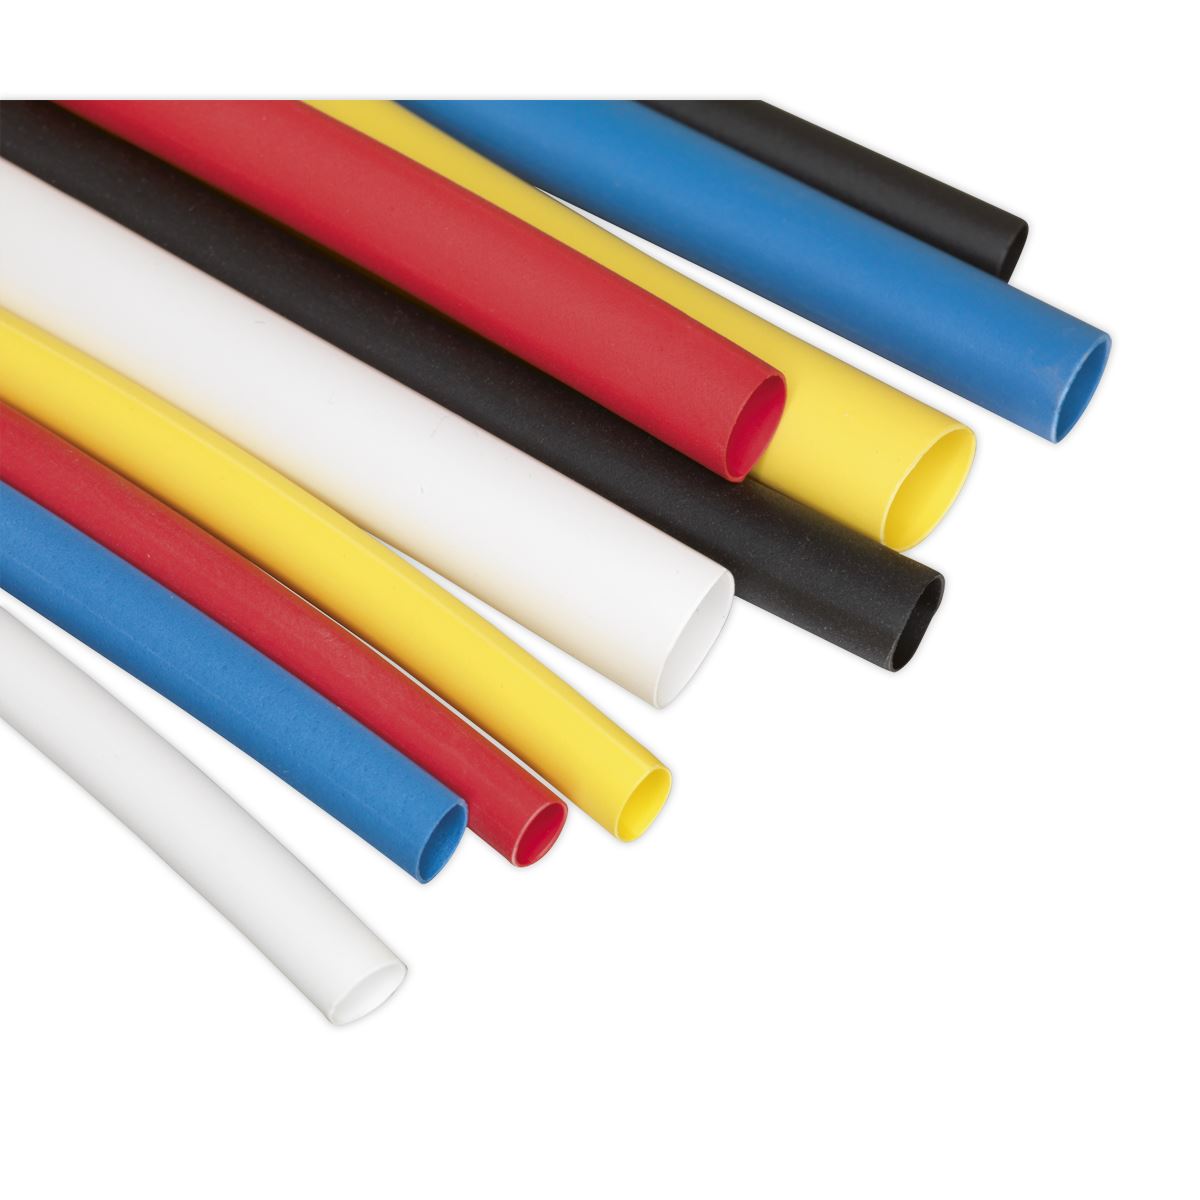 Sealey Heat Shrink Tubing Assortment 190pc 50mm Mixed Colours